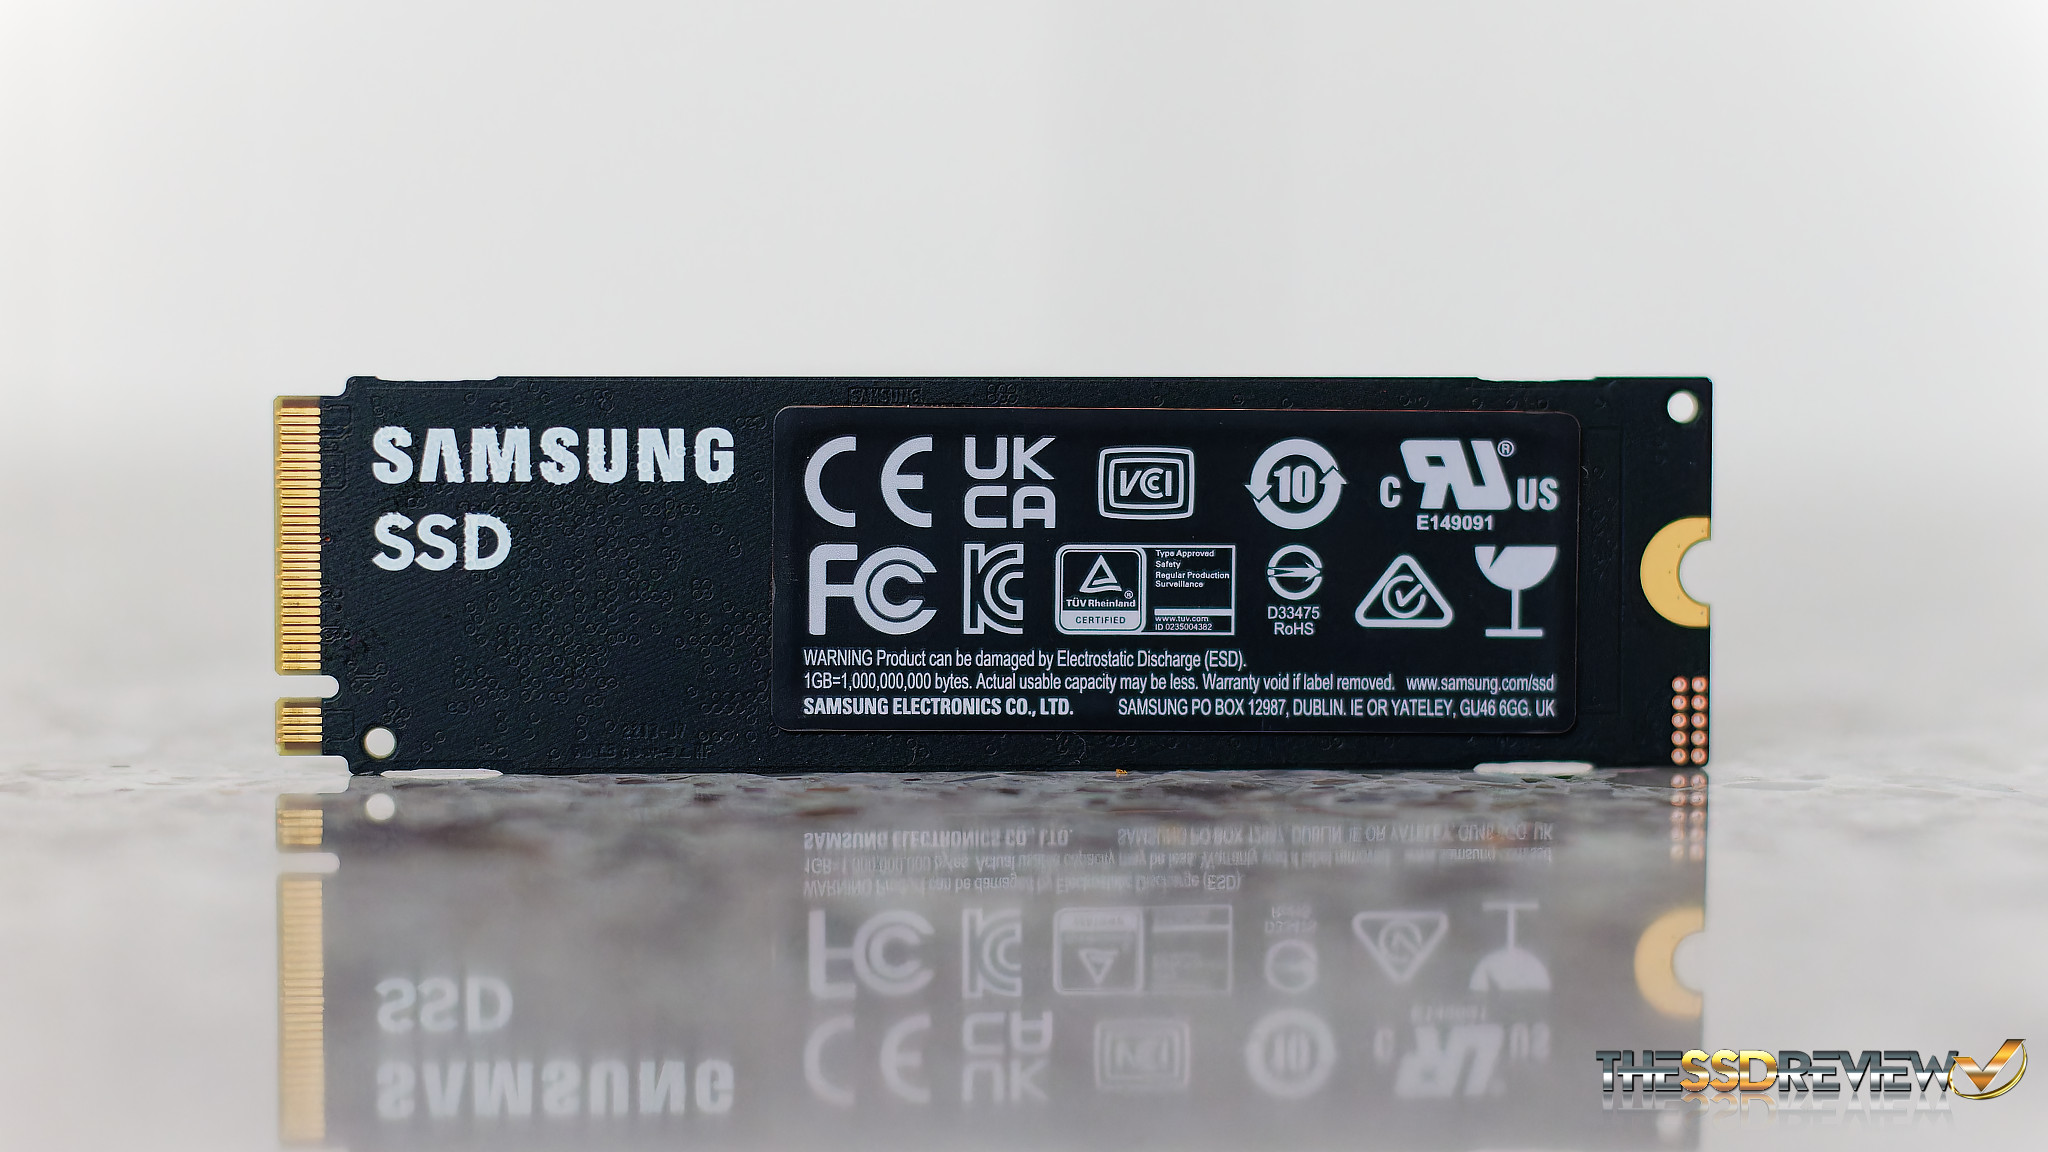 Samsung 990 PRO SSD: The Best of the Best